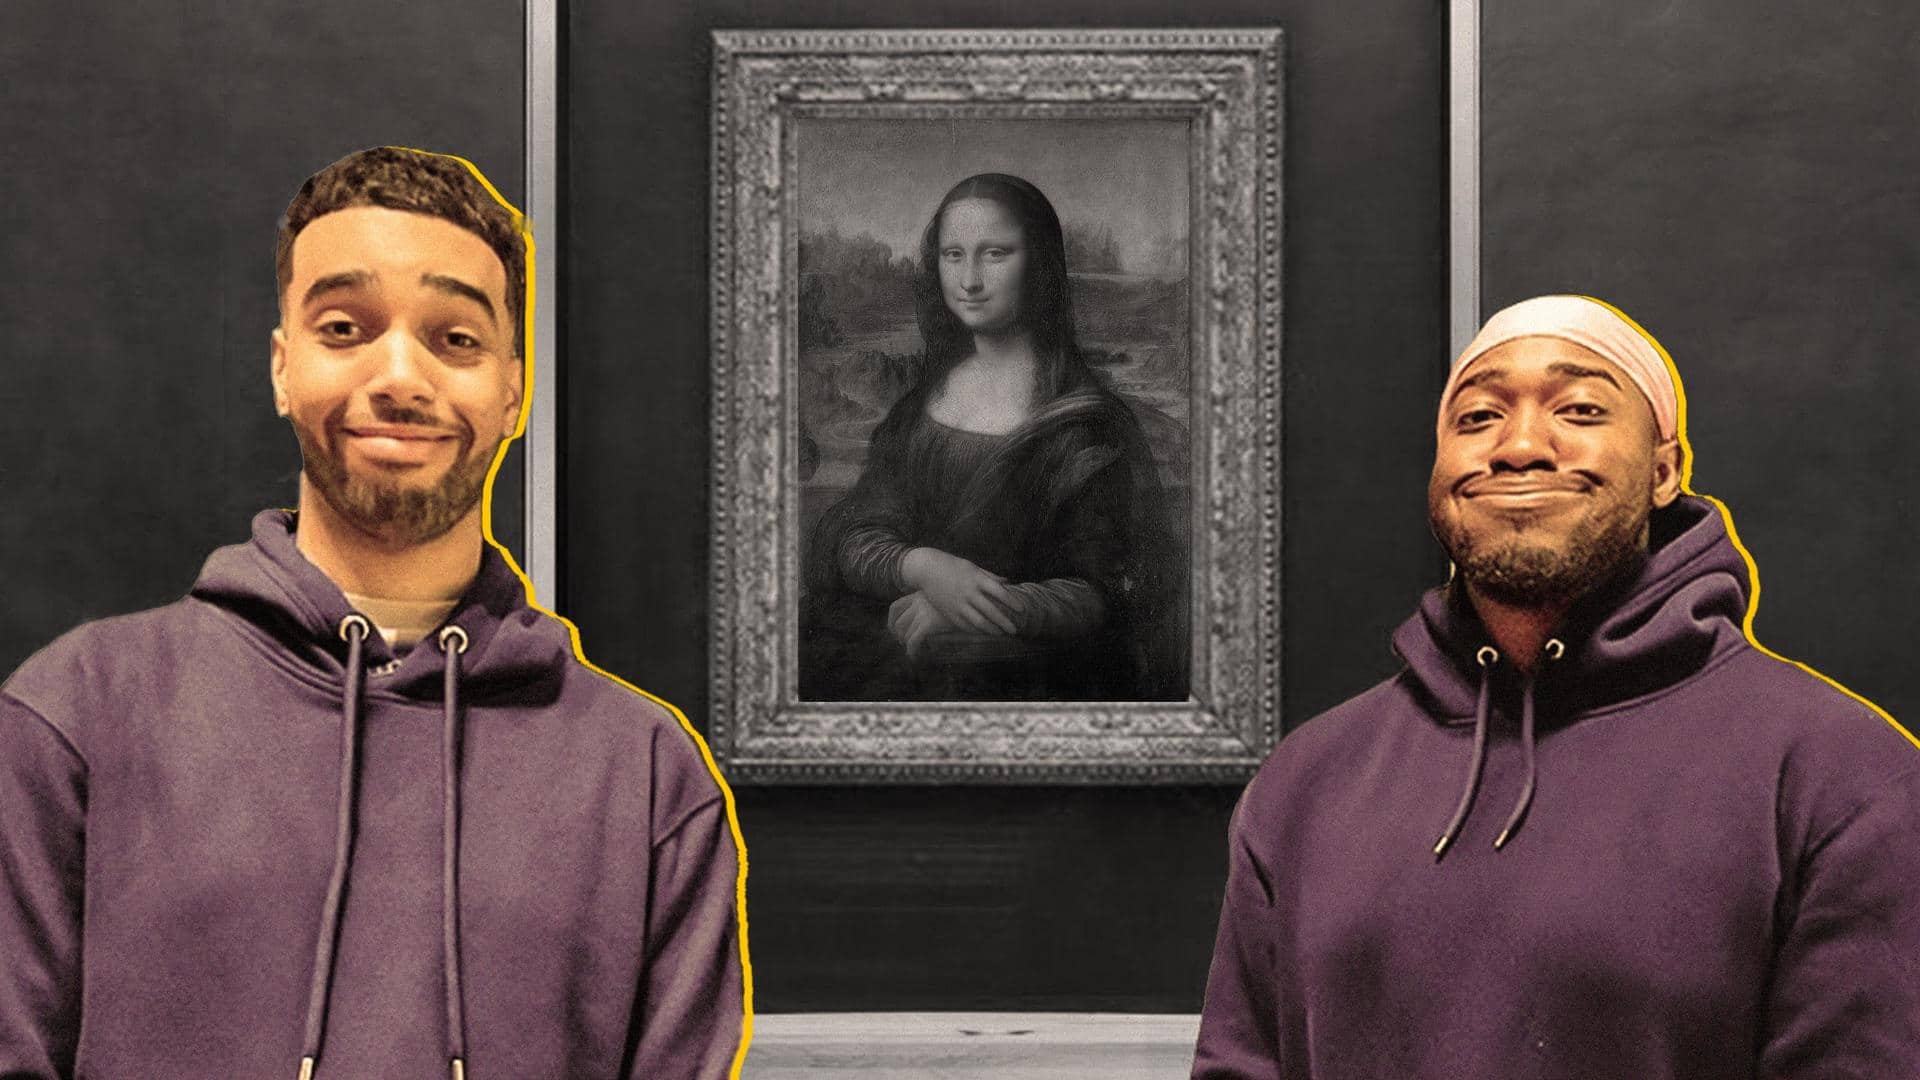 YouTuber installs his own portrait right next to Mona Lisa